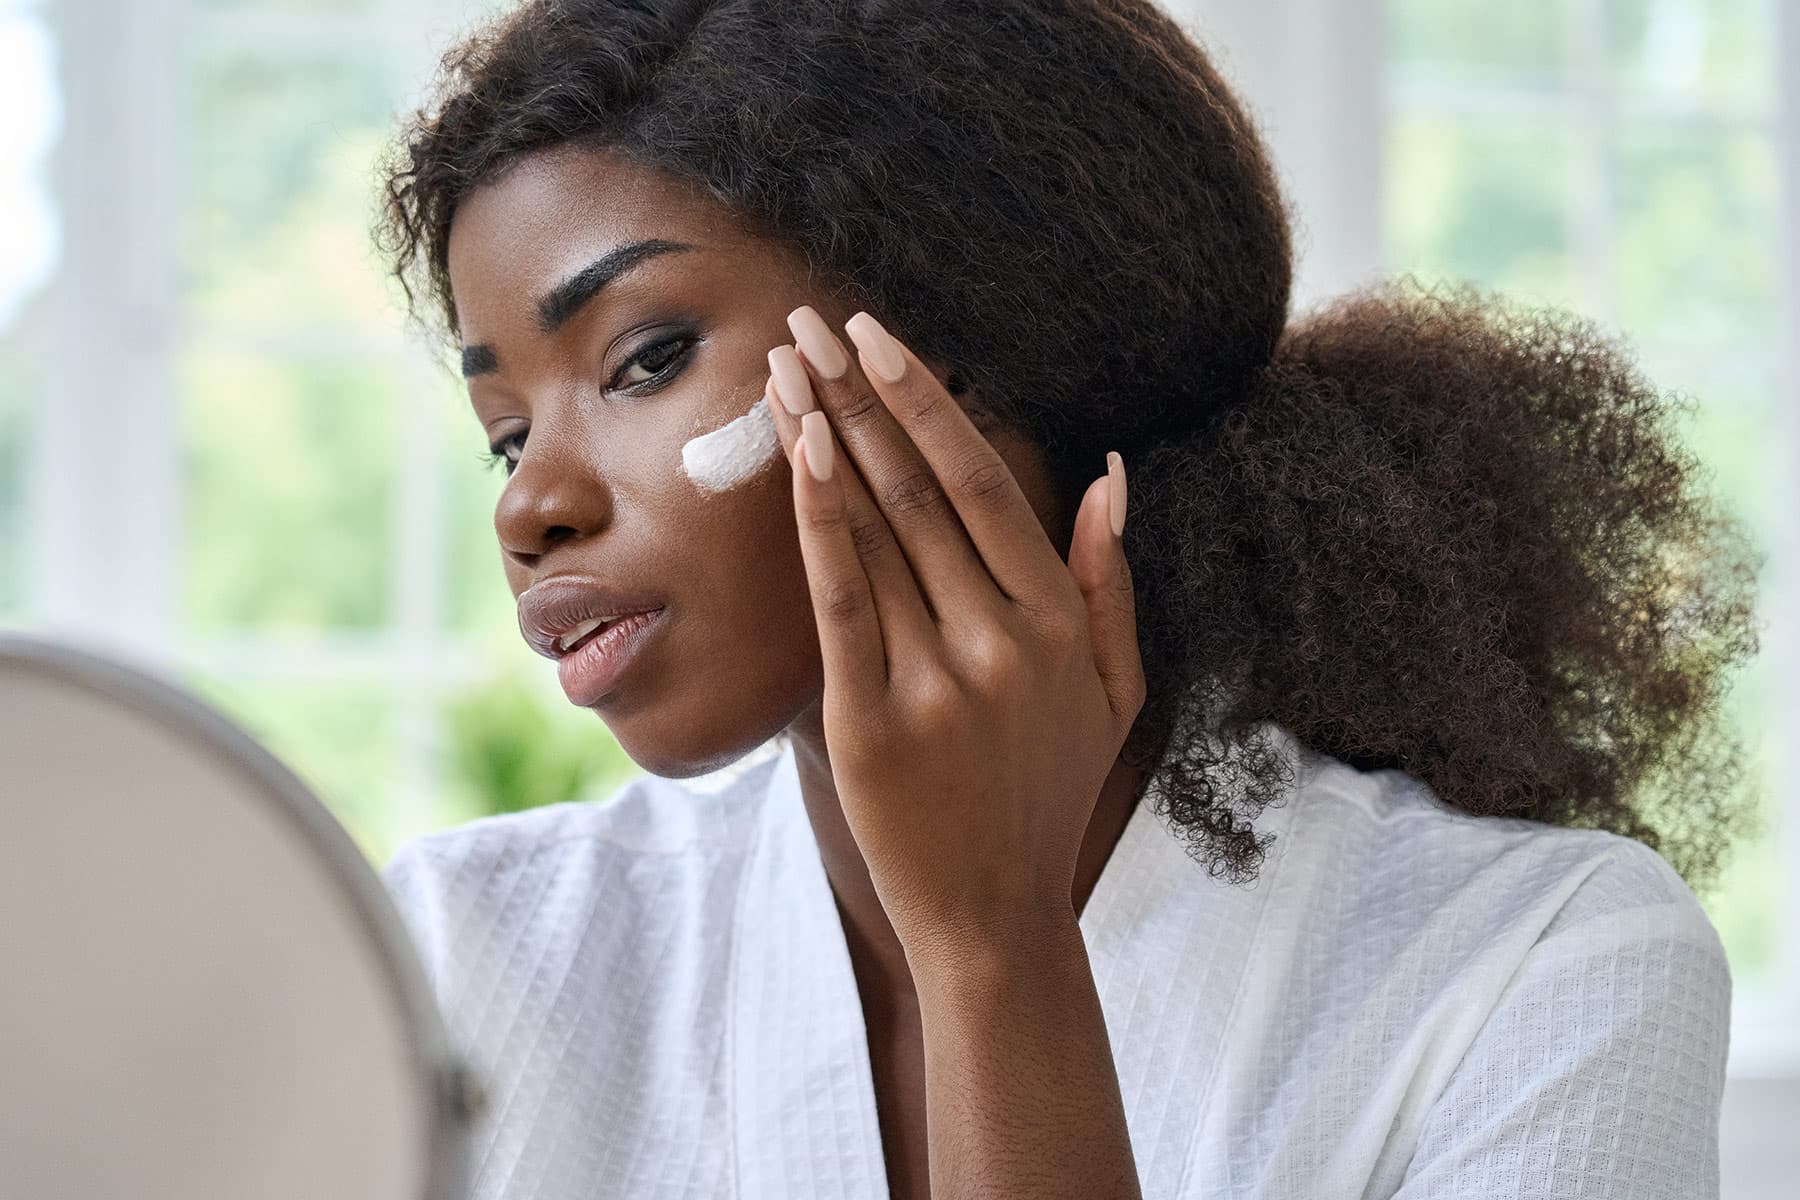 Expert Q&A: Common Skin Problems in People of Color